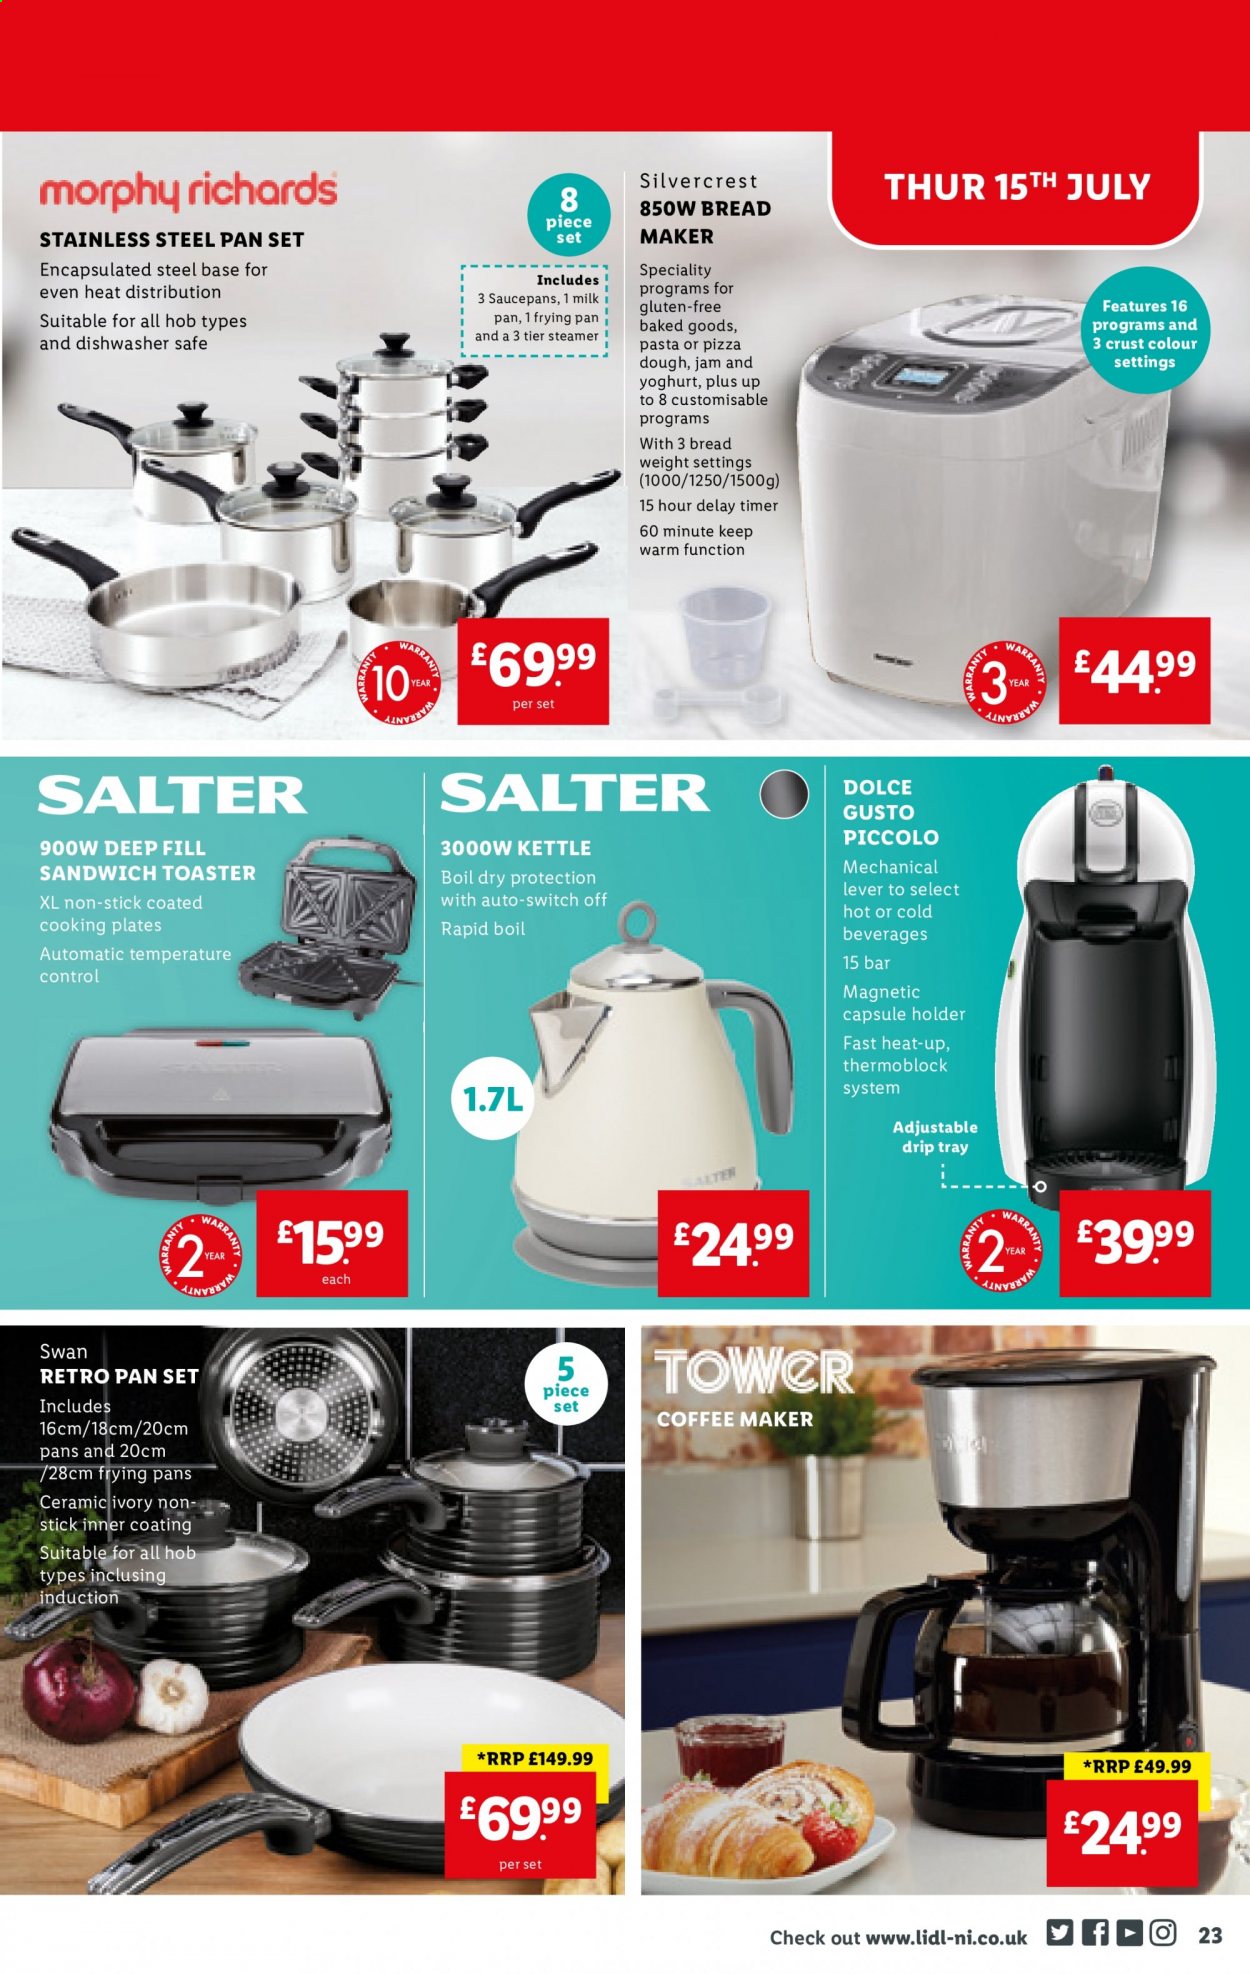 thumbnail - Lidl offer  - 15/07/2021 - 21/07/2021 - Sales products - SilverCrest, bread, sandwich, yoghurt, milk, pizza dough, fruit jam, Dolce Gusto, holder, plate, pan, coffee machine, toaster, kettle, switch. Page 23.